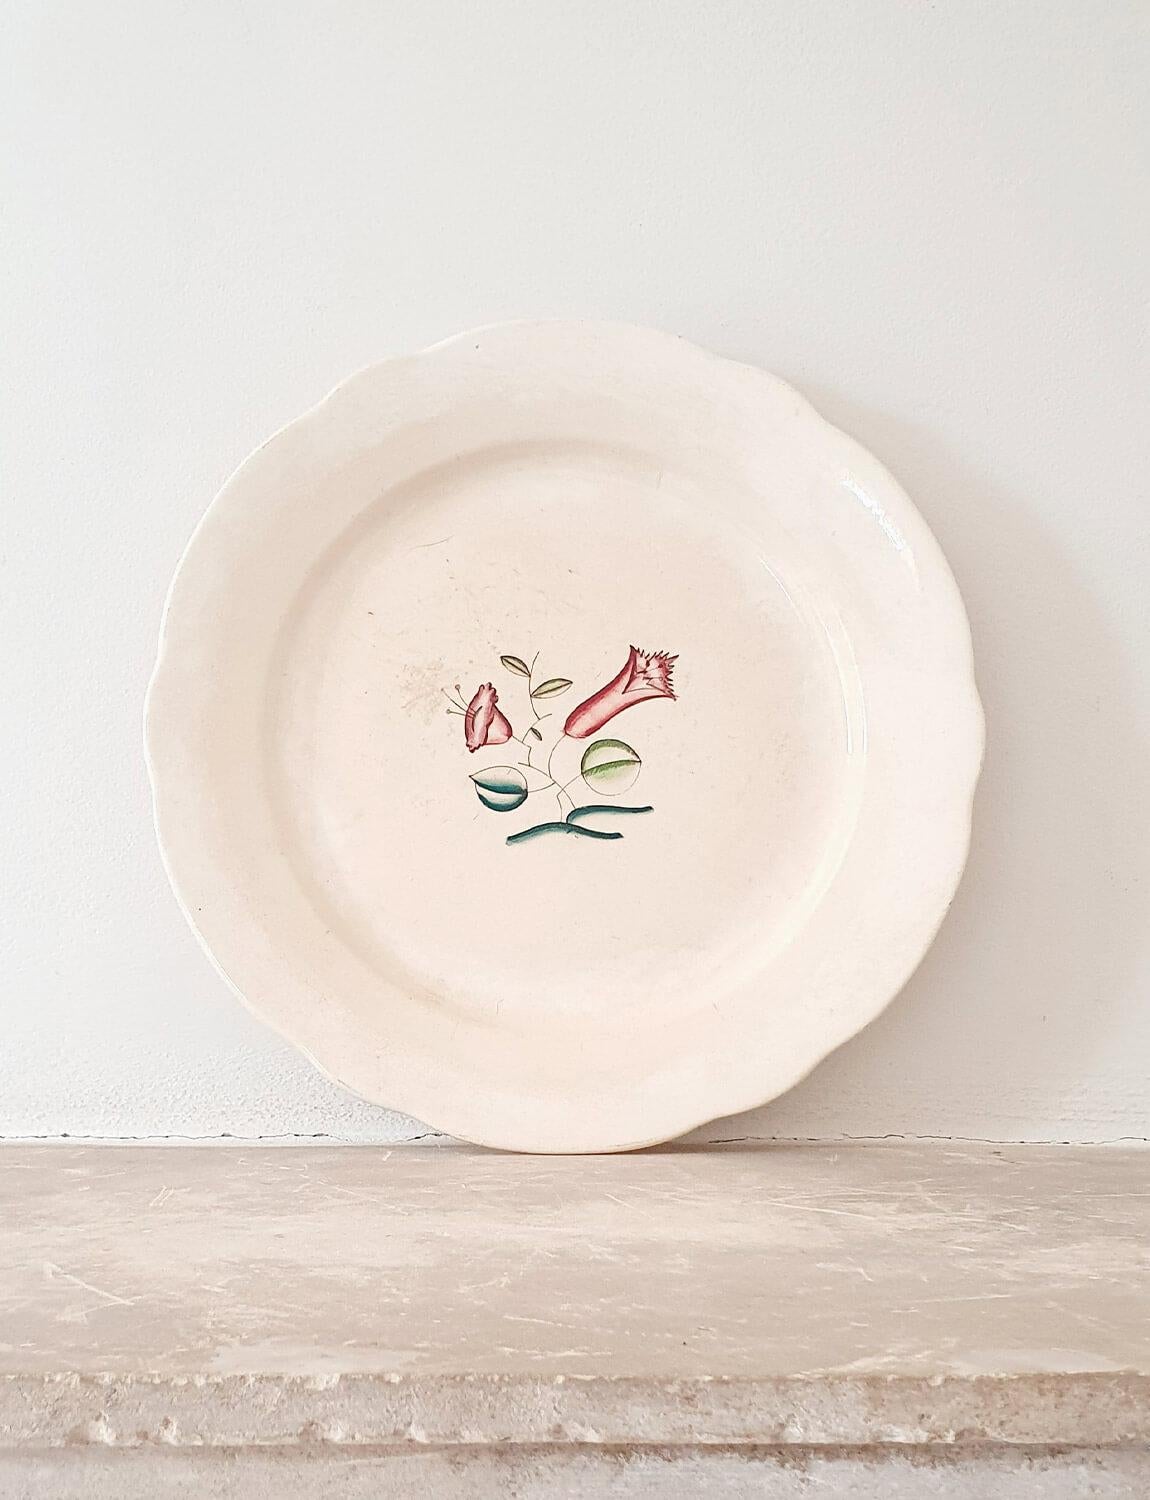 A pretty hand-painted Italian ceramic serving plate by the extraordinary designer, Guido Andlovitz and found amongst a private collection of his works. This 1930s plate has a beautiful flower motif designed by Adlovitz himself. The plate was made